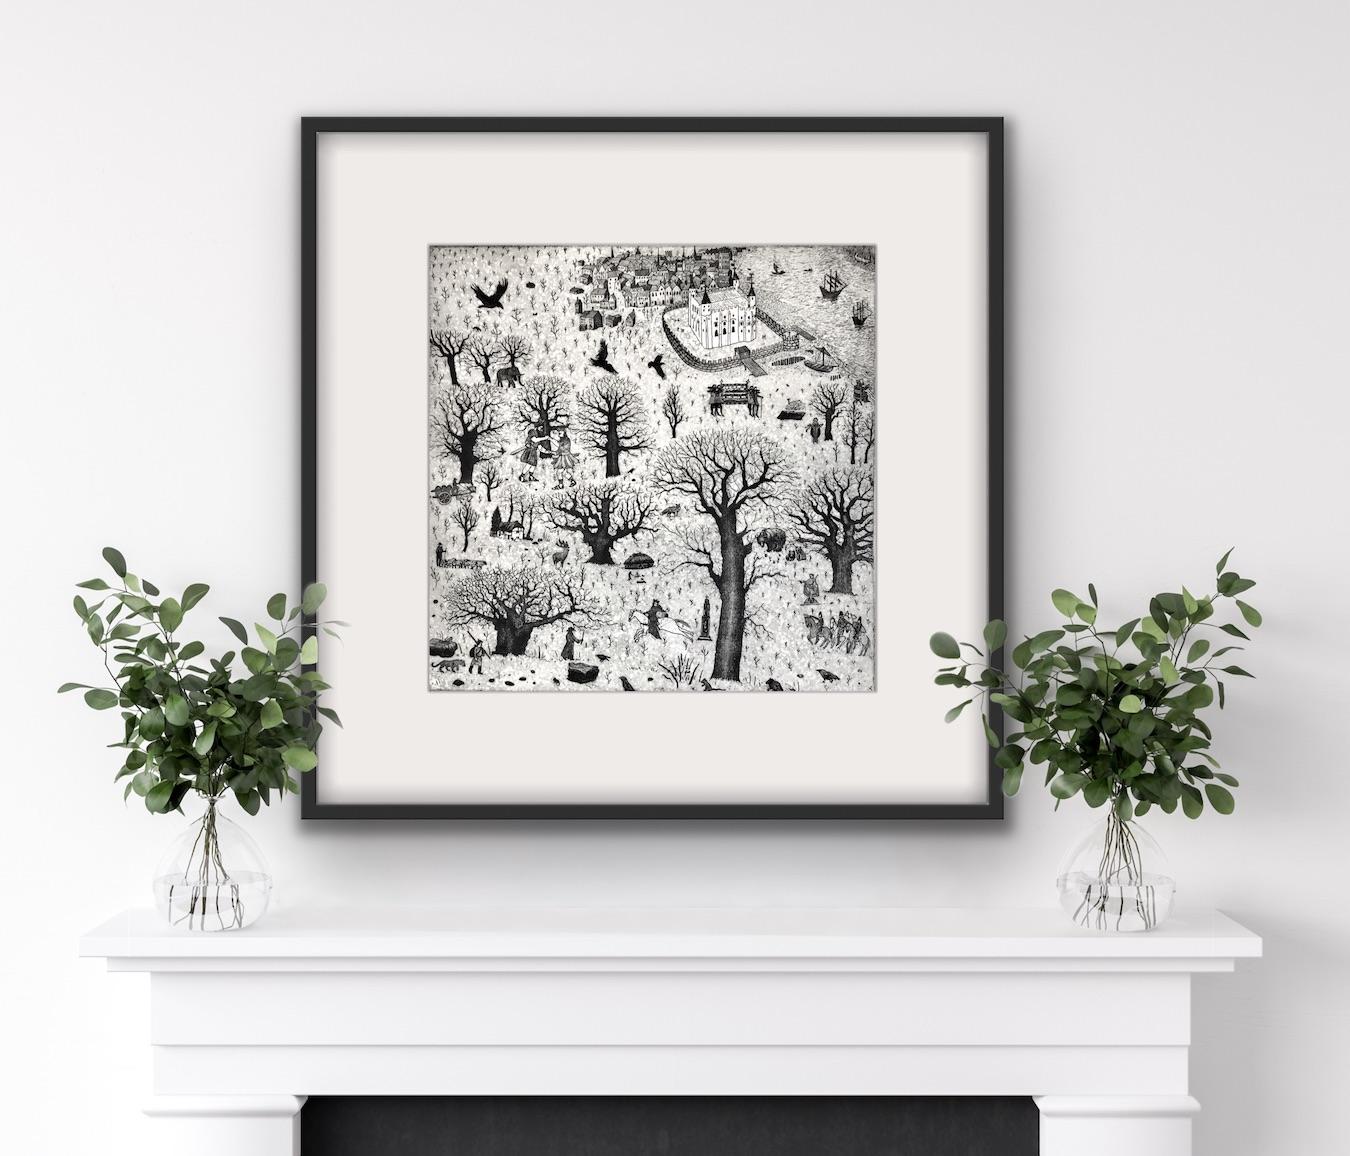 A Tale of London, Tim Southall, Illustration and folk art, Limited edition  - Gray Landscape Print by Tim Southall 